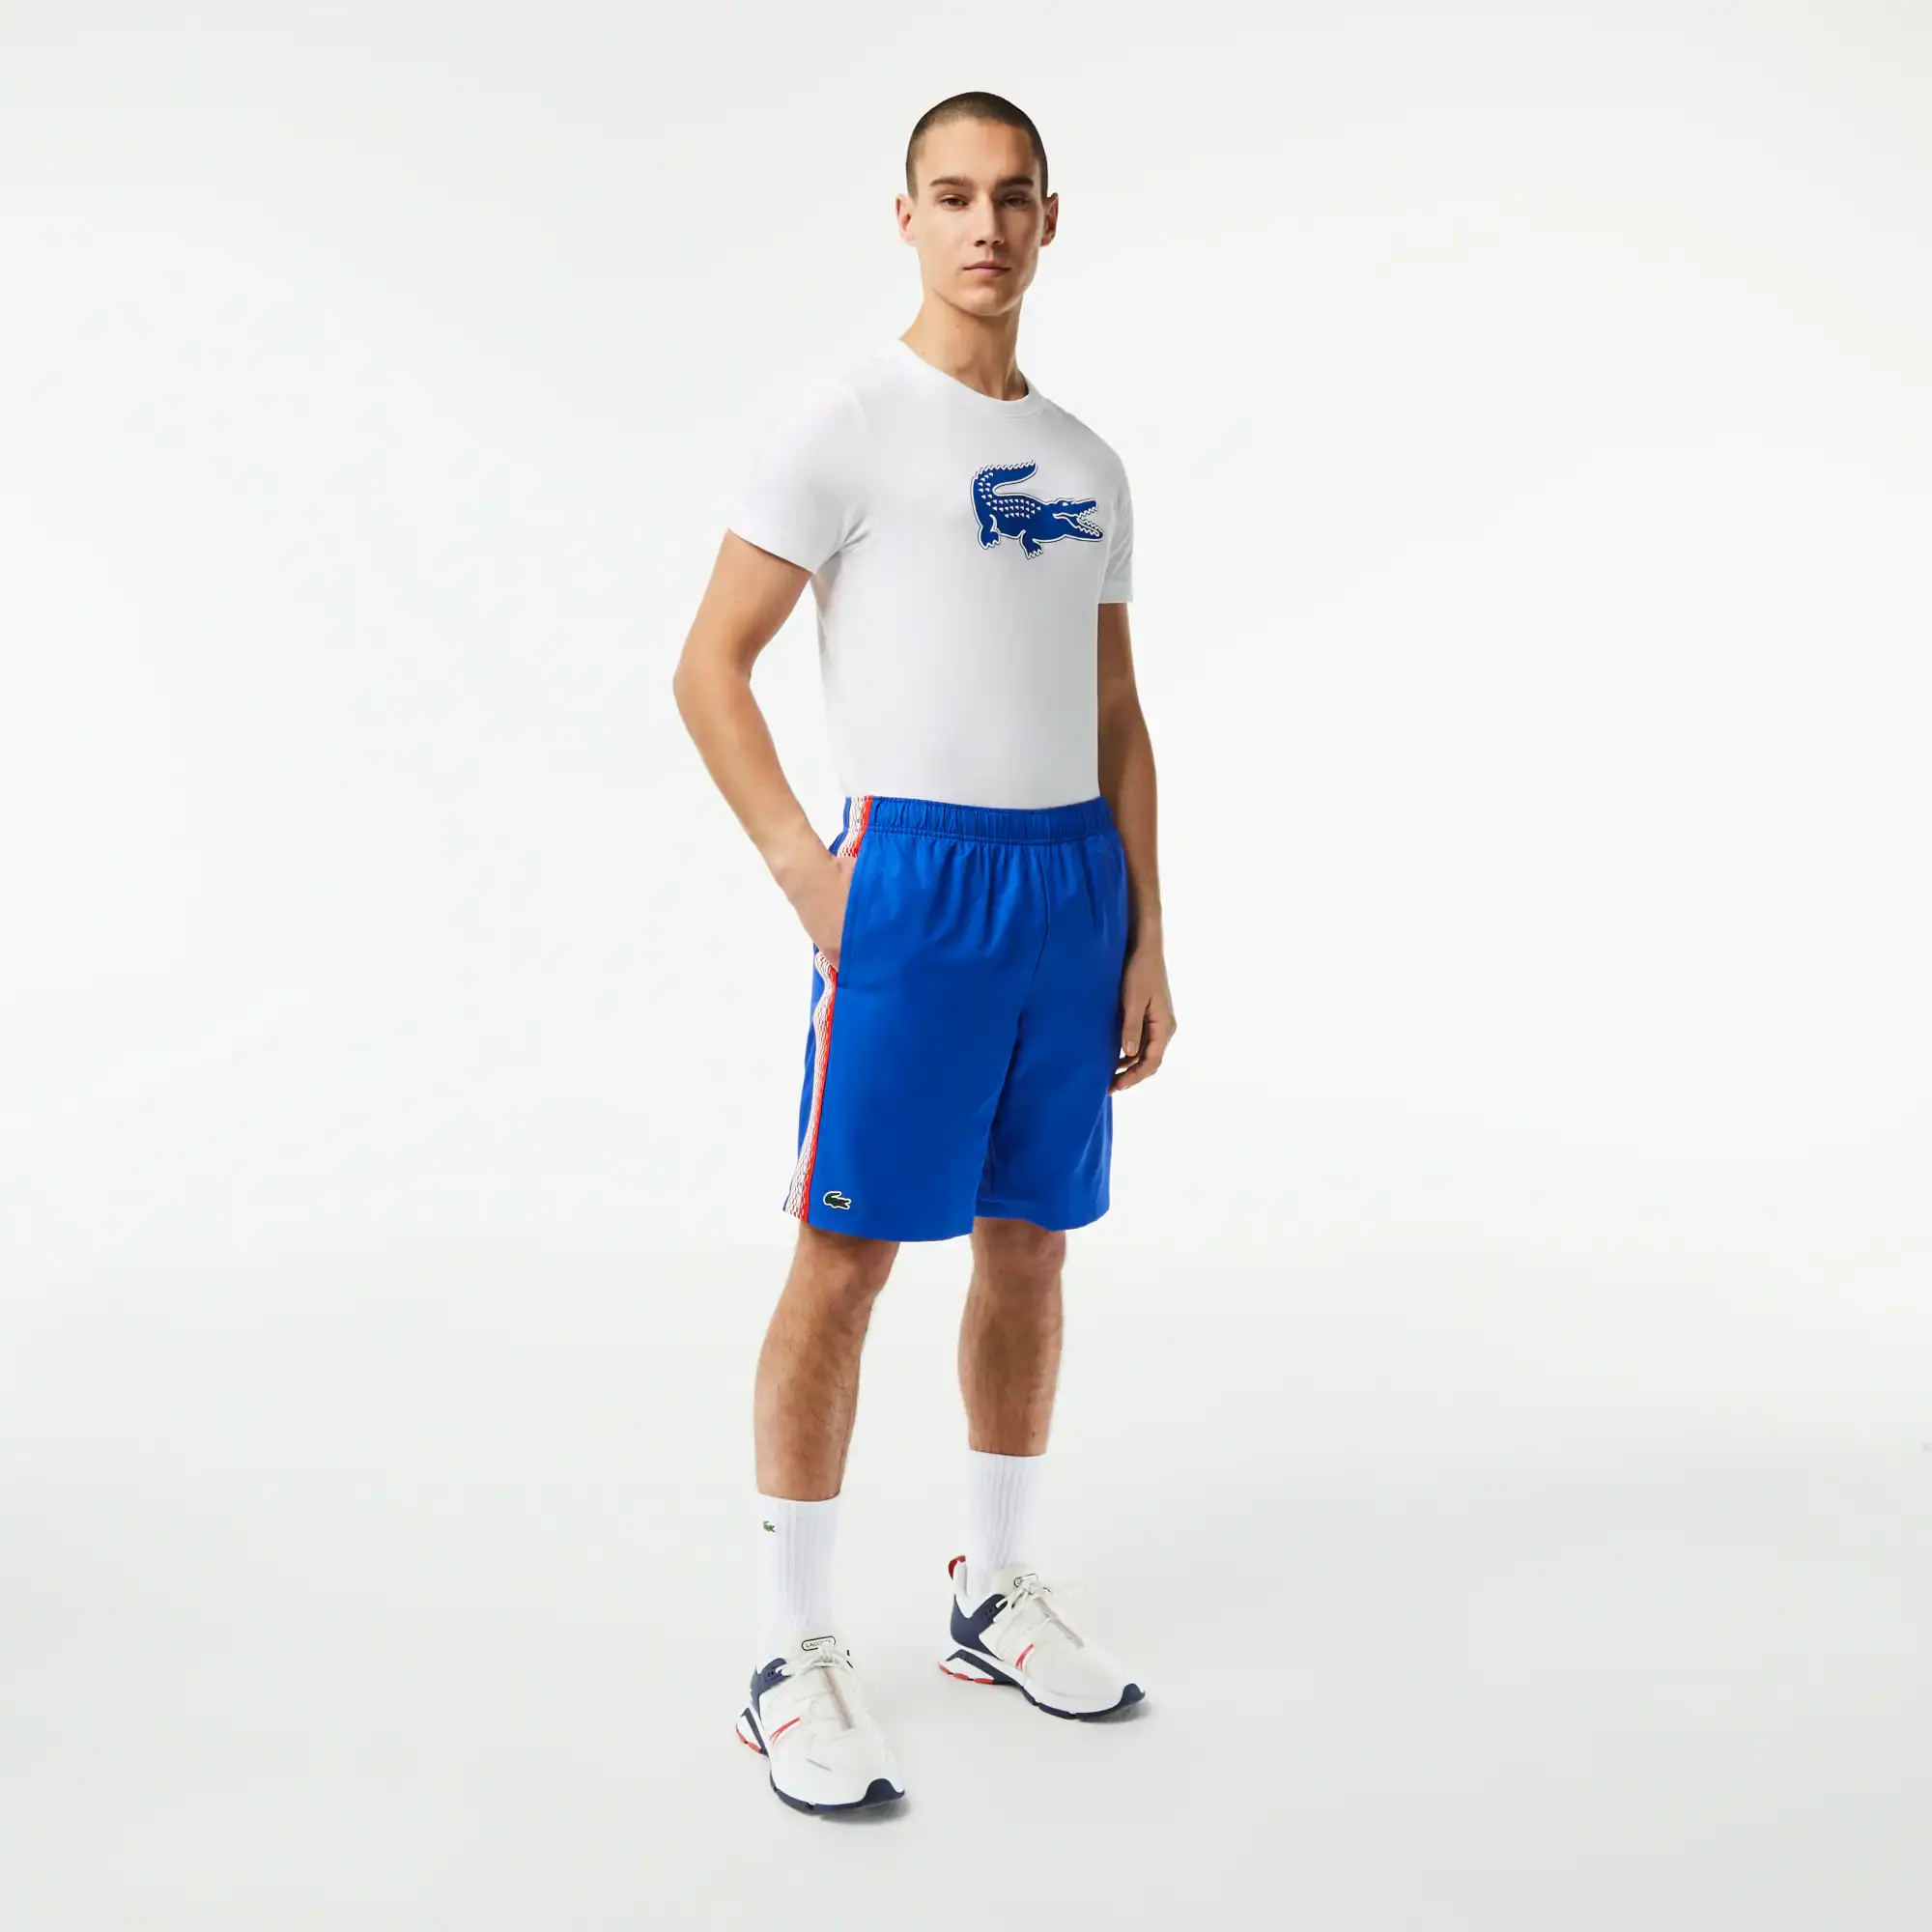 Lacoste Men’s Recycled Polyester Tennis Shorts. 1